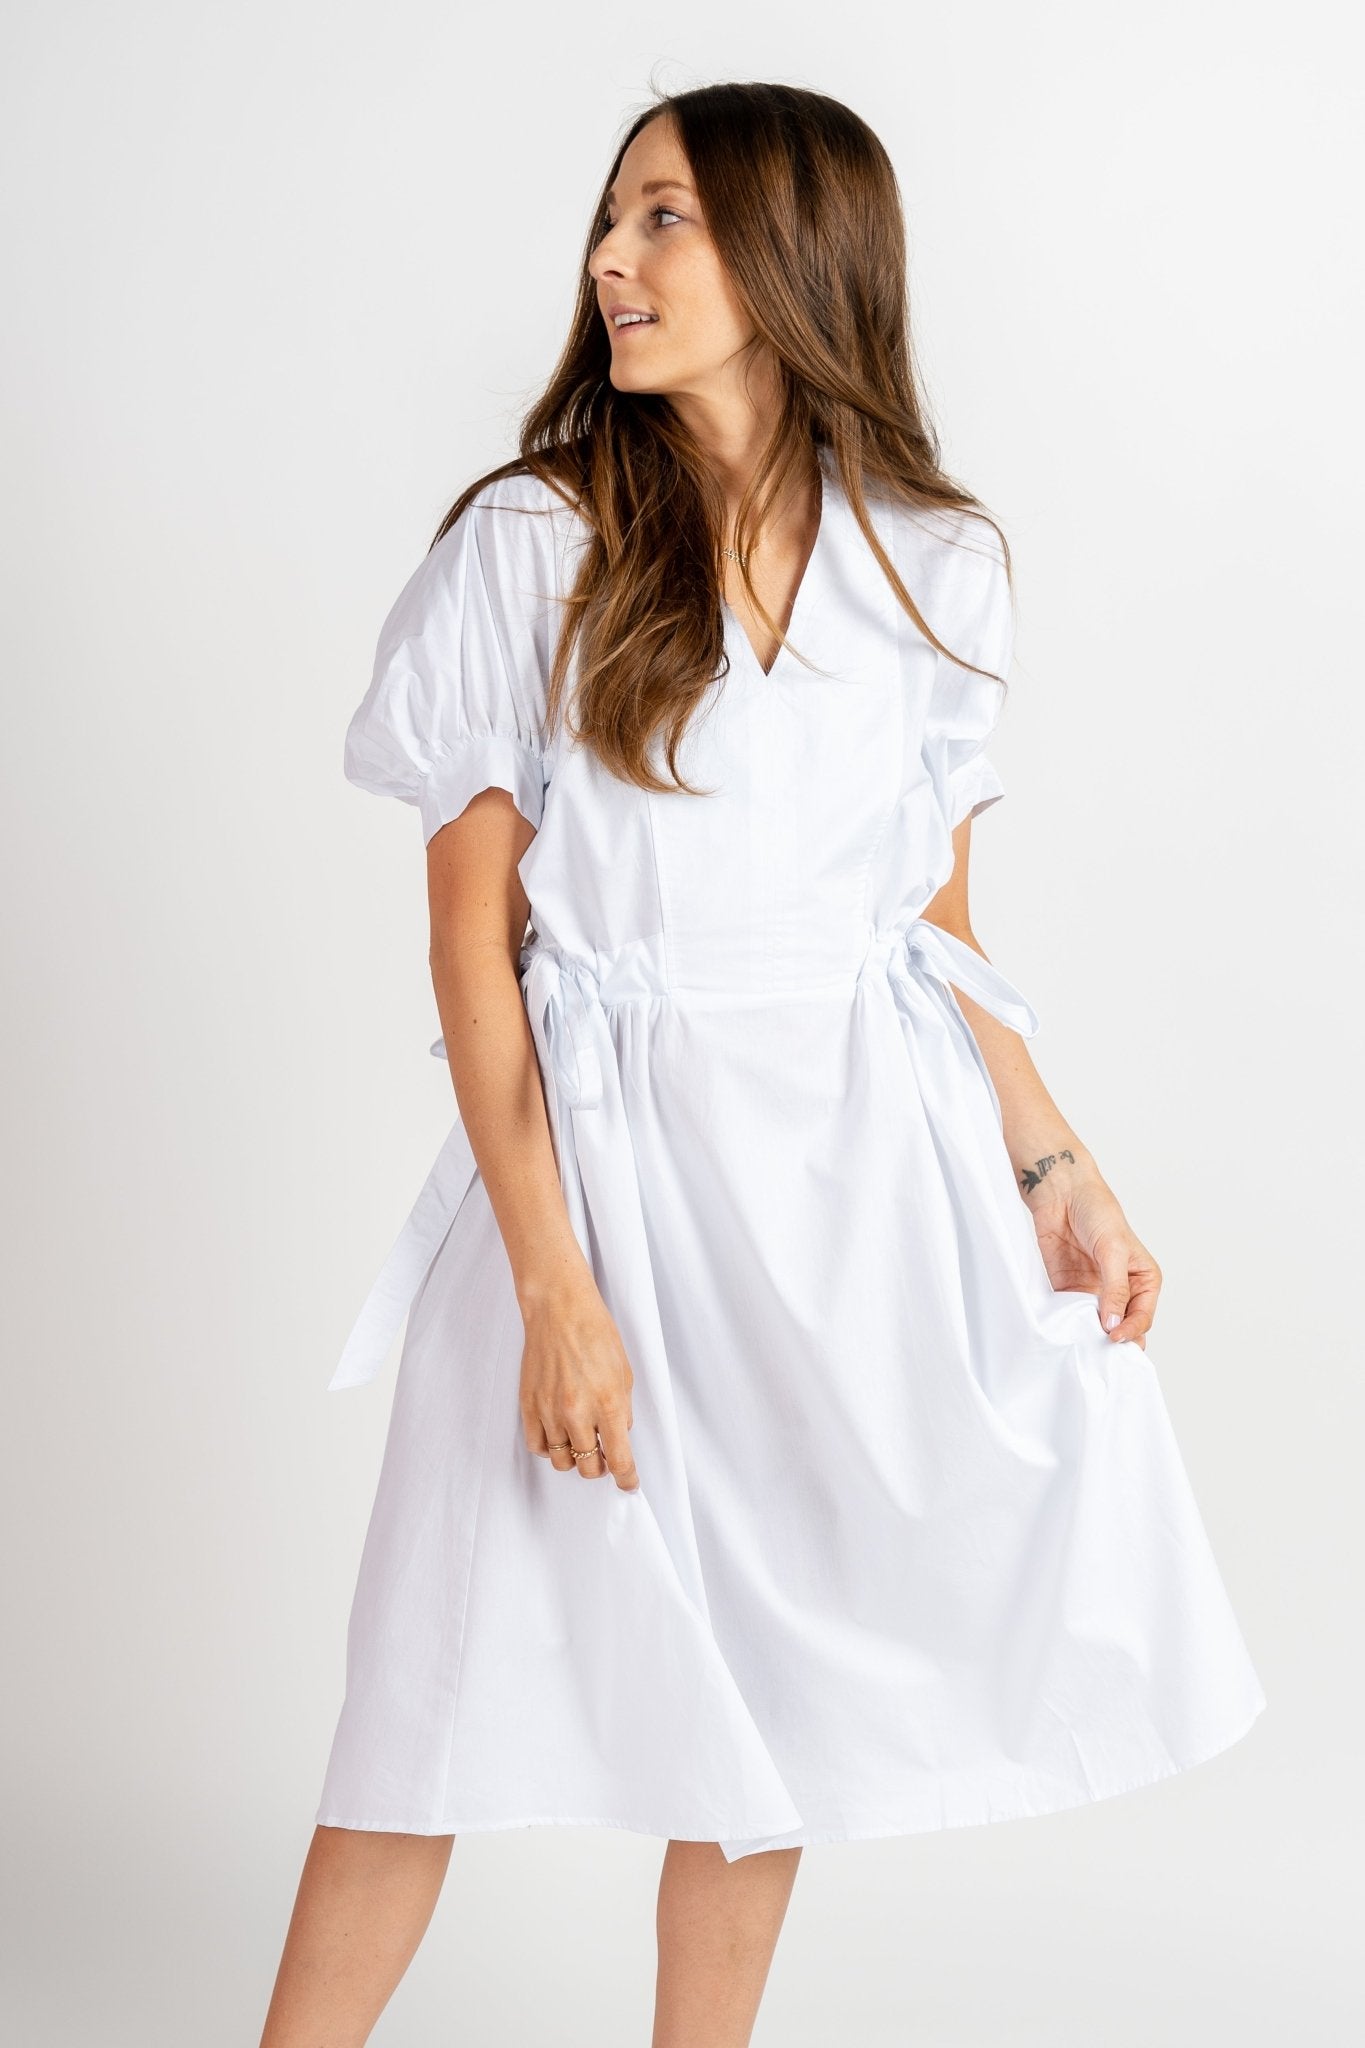 Tiered babydoll dress white - Cute Dress - Trendy Dresses at Lush Fashion Lounge Boutique in Oklahoma City